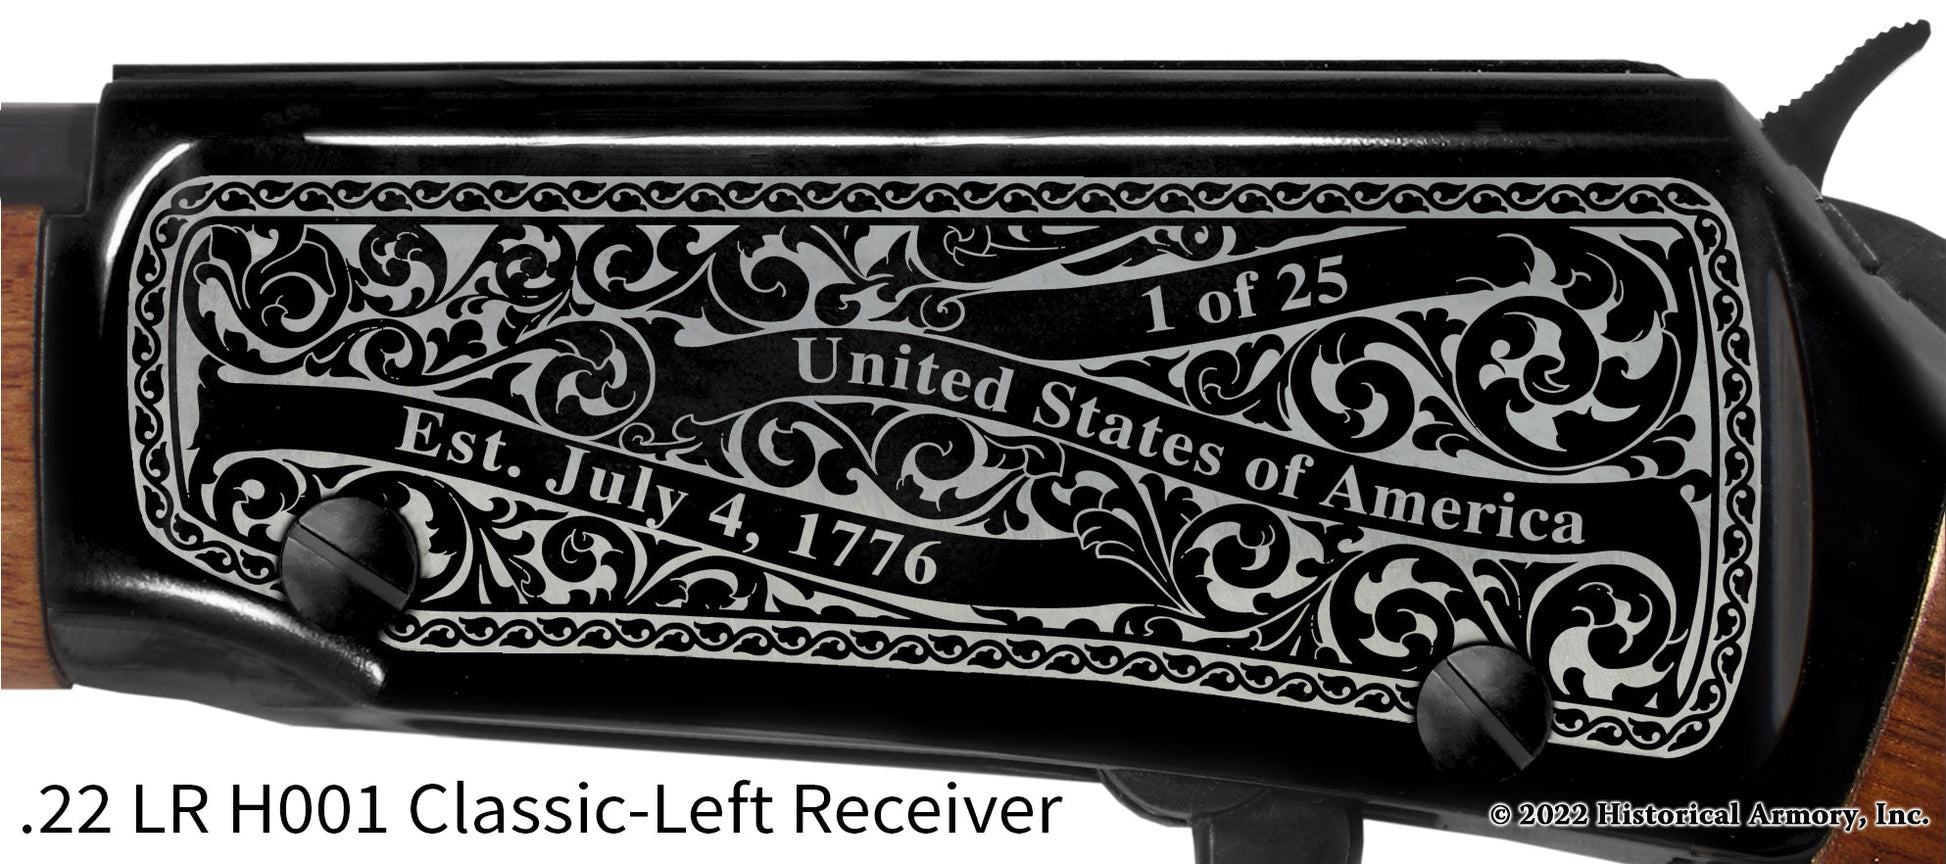 Wright County Missouri Engraved Henry H001 Rifle